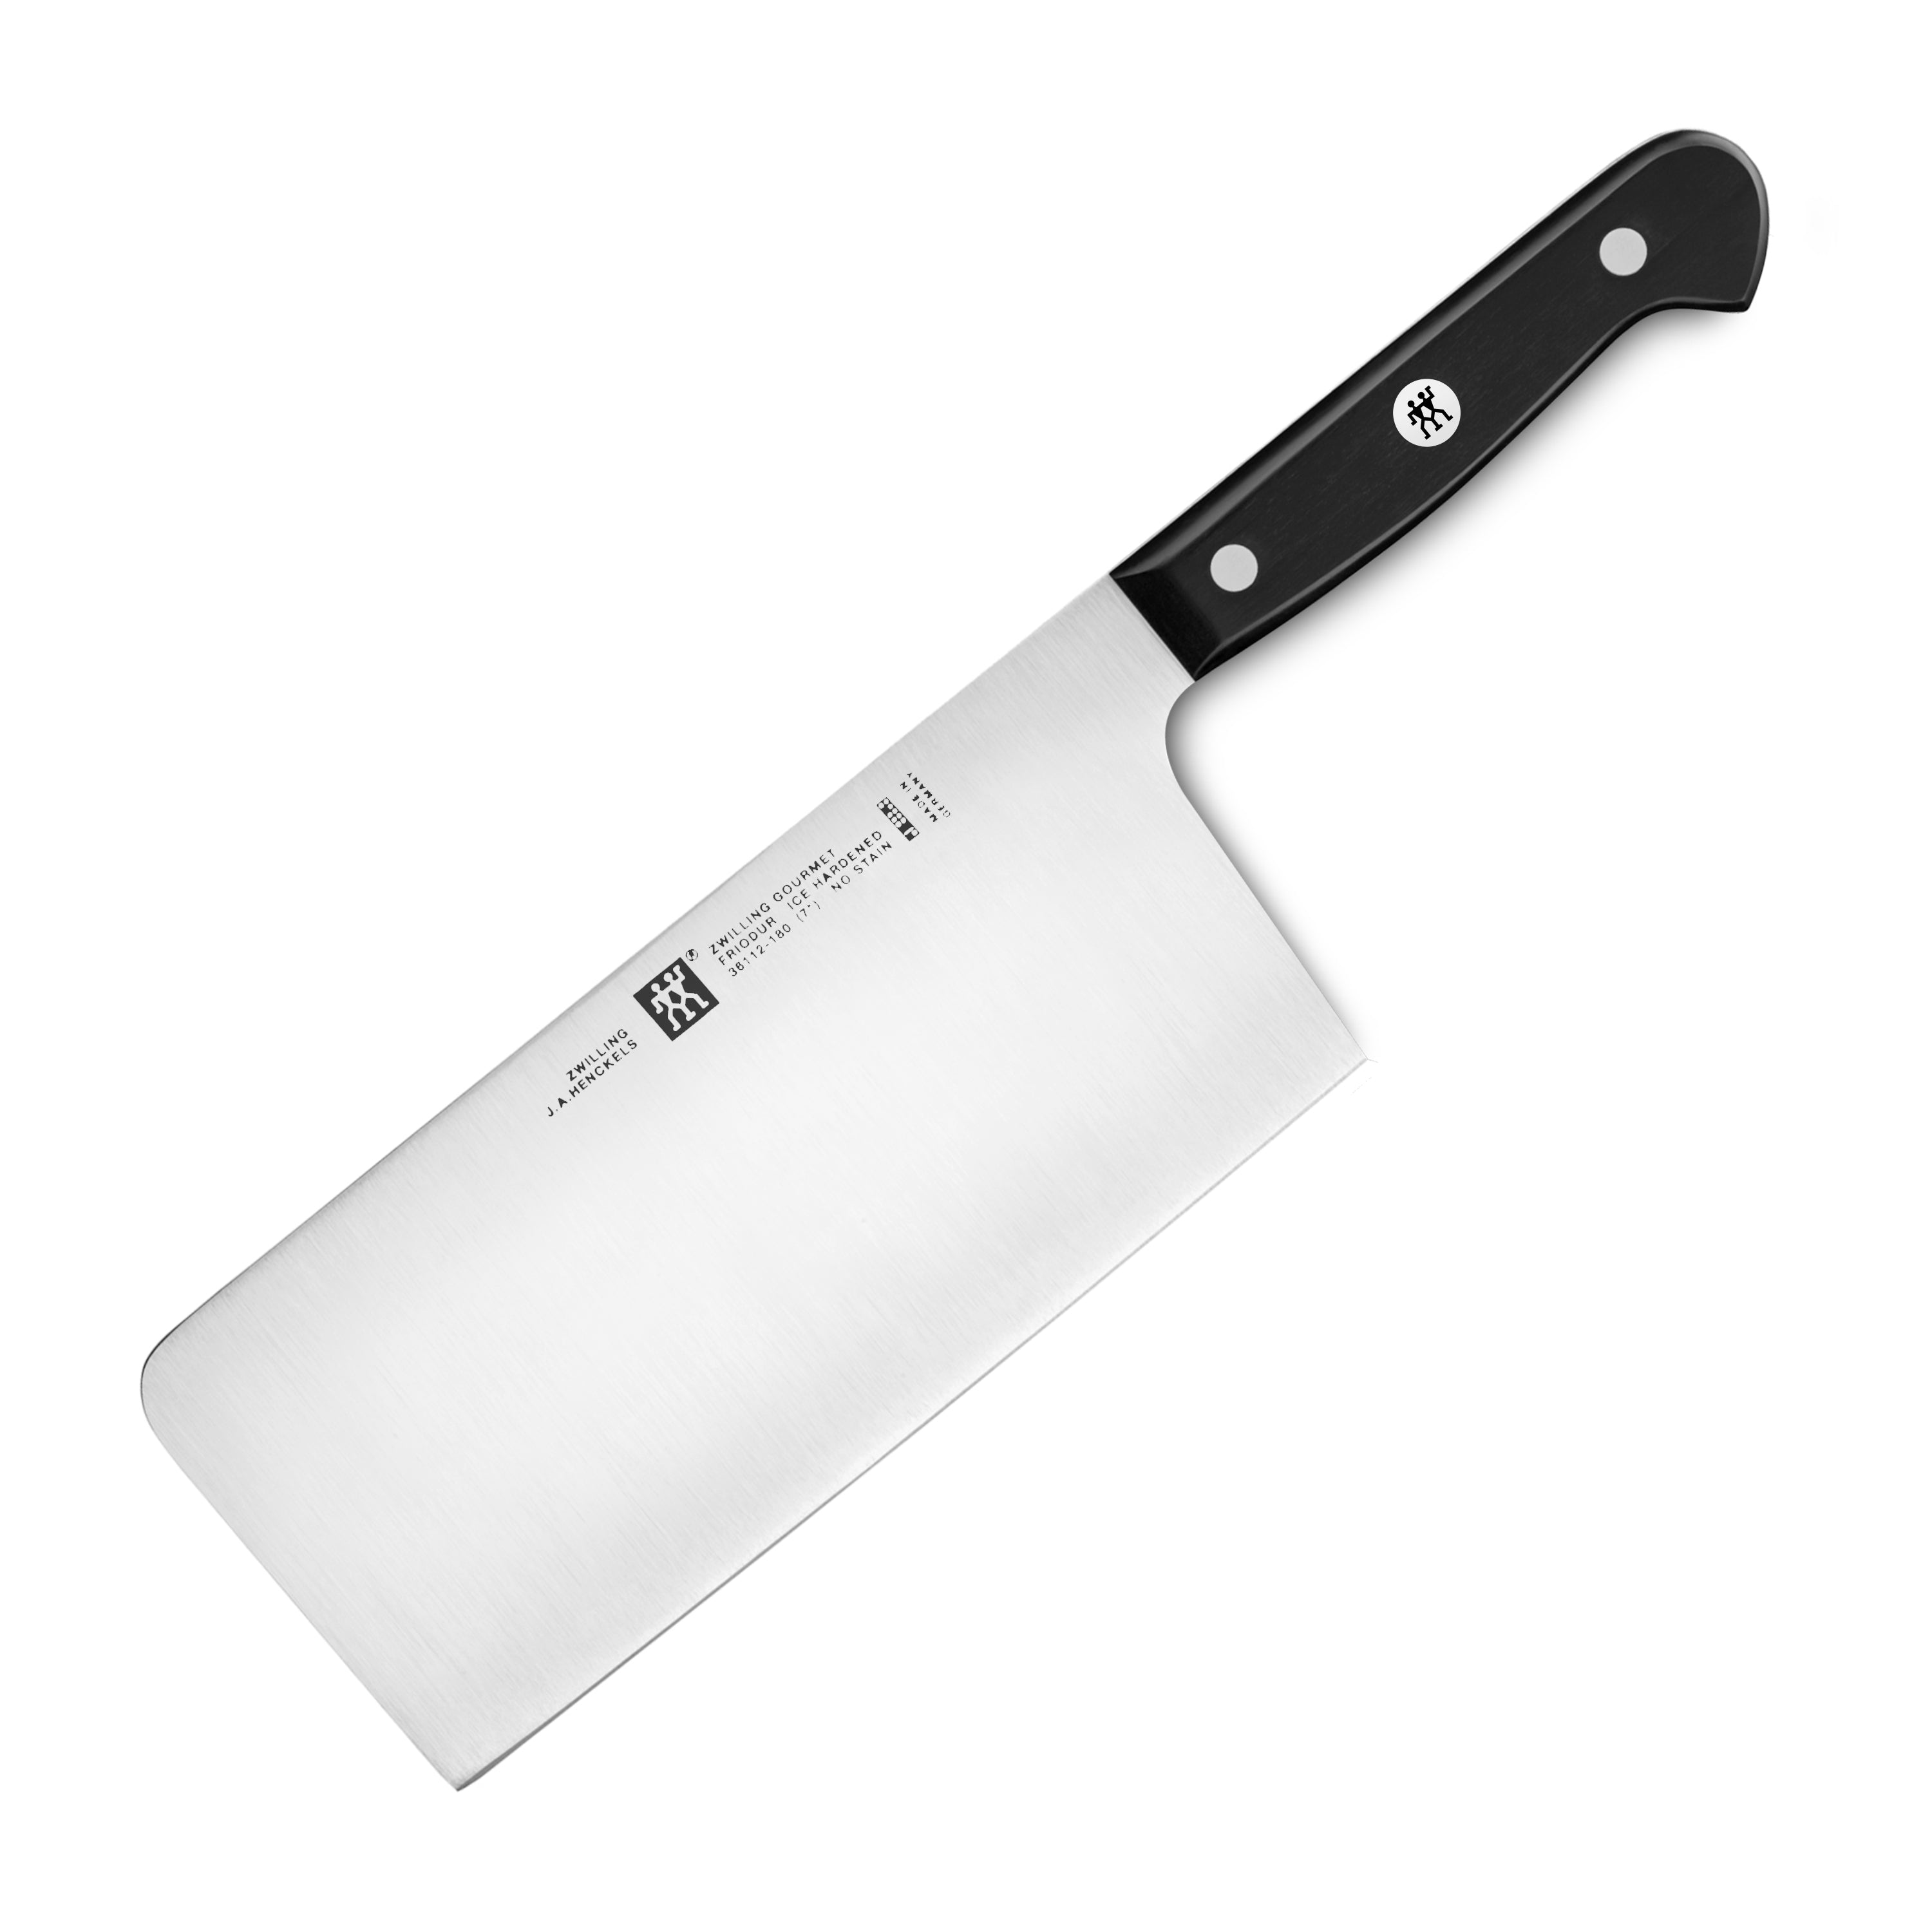 Zwilling All * Star 7-Inch, Chinese Chef's Knife, Matte Gold